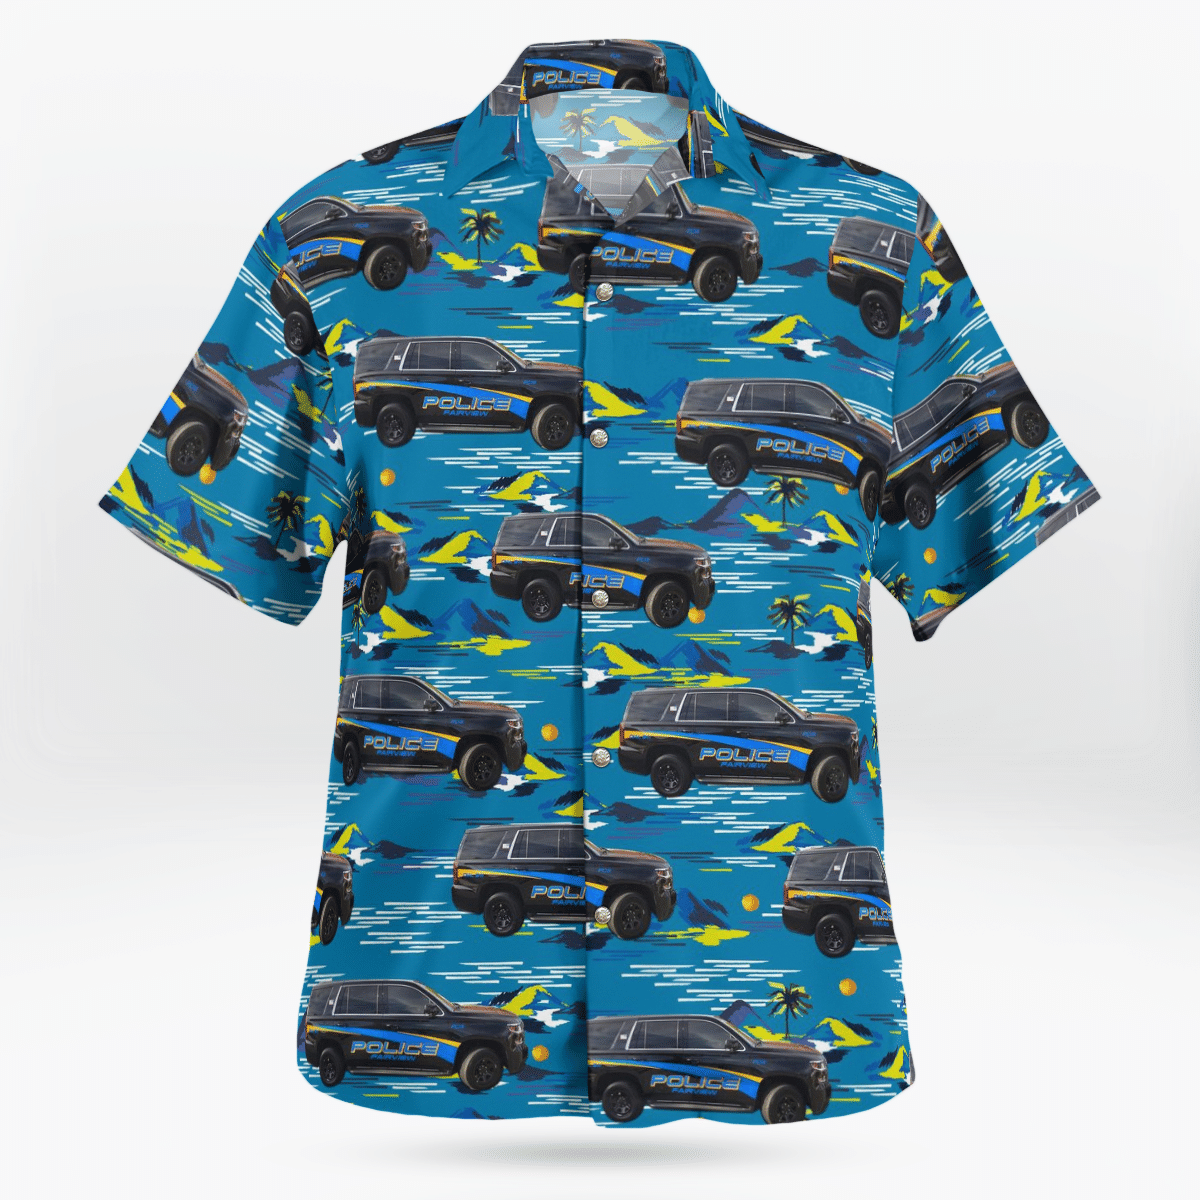 Hawaiian shirts never go out of style 217